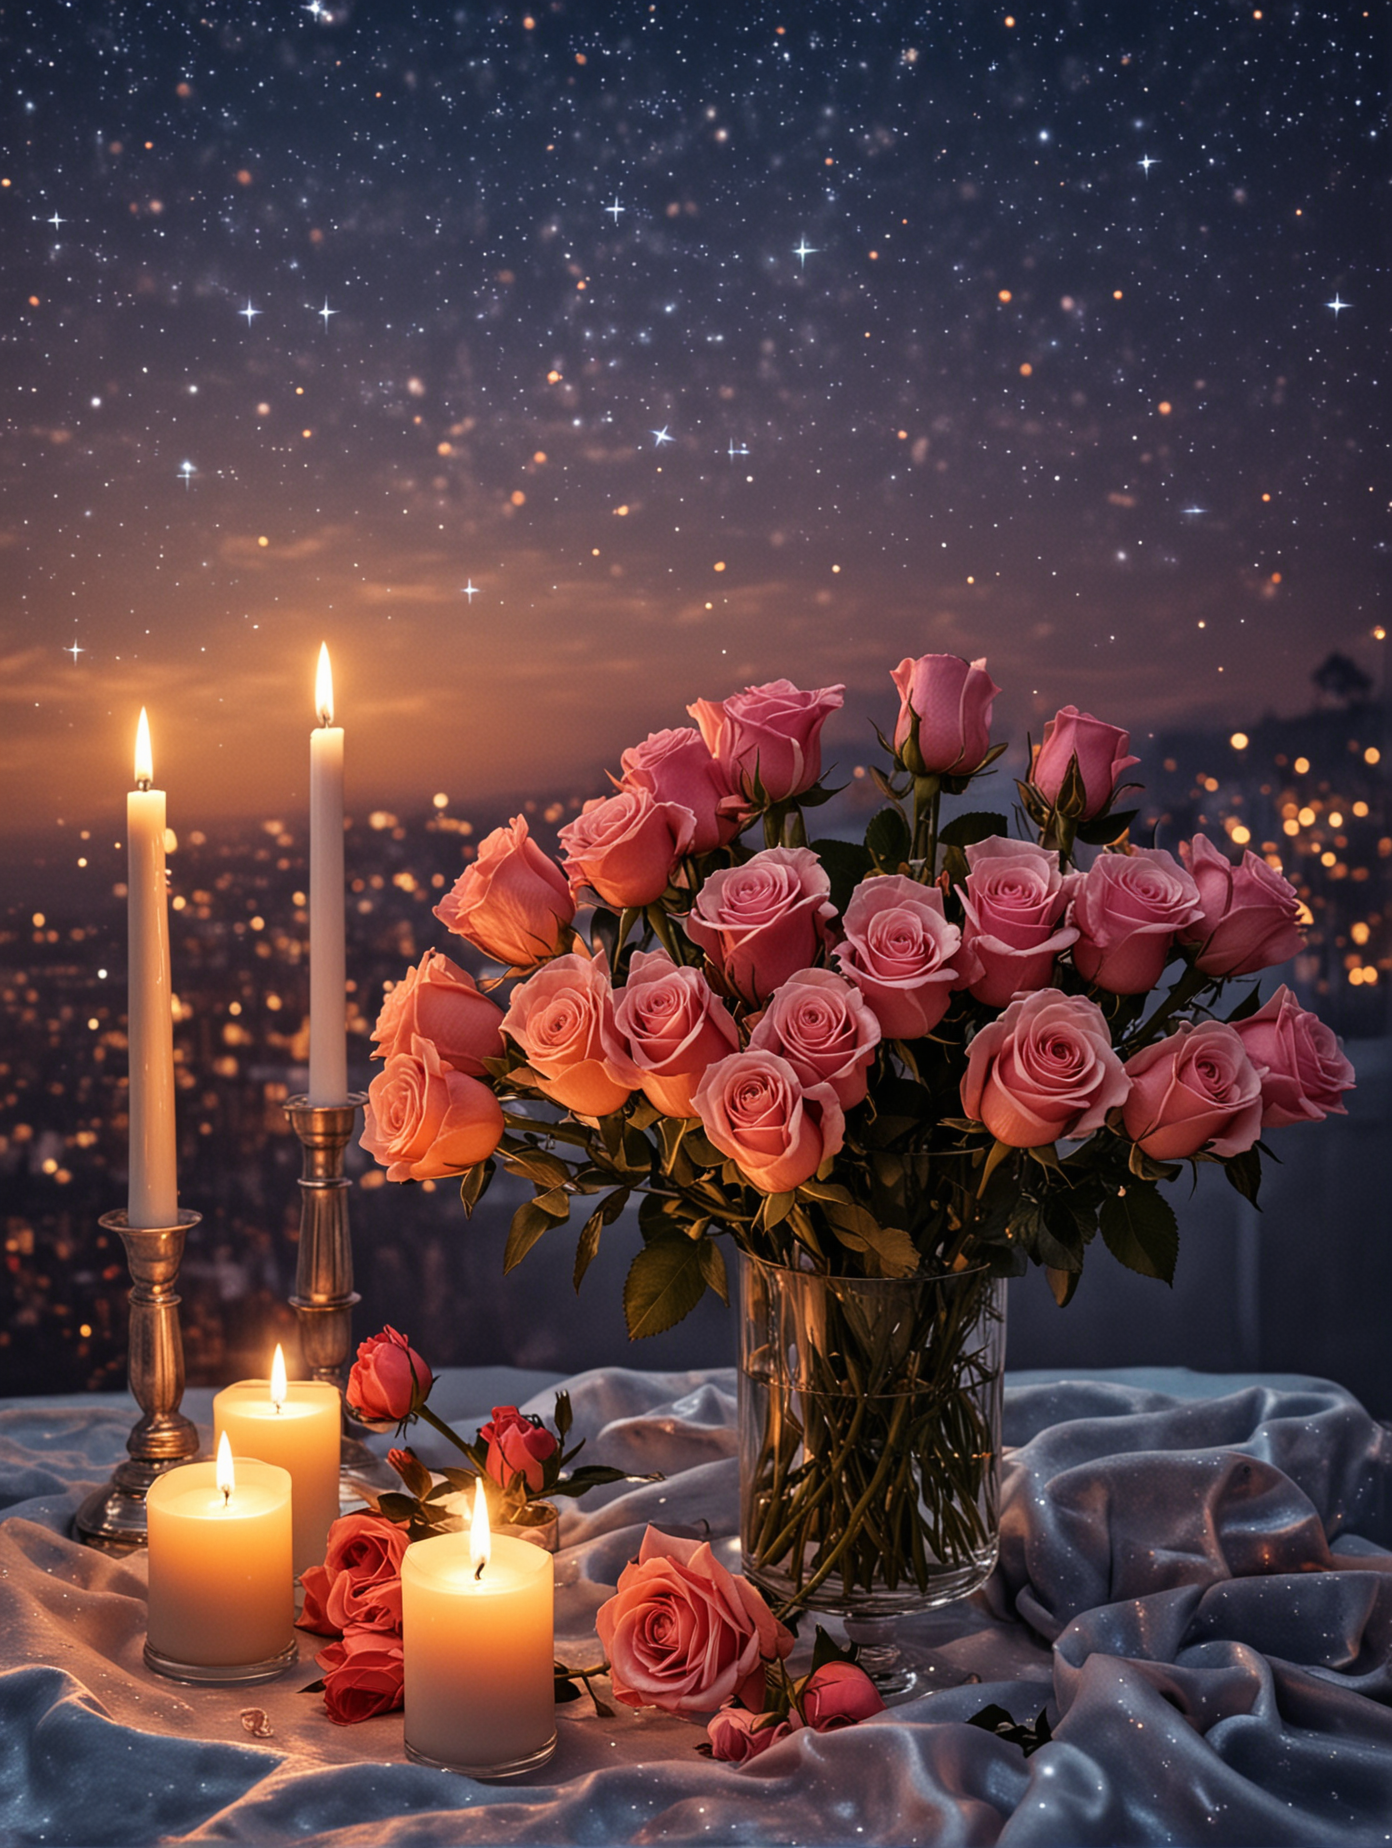 Romantic Evening Under Starry Sky with Candles and Roses